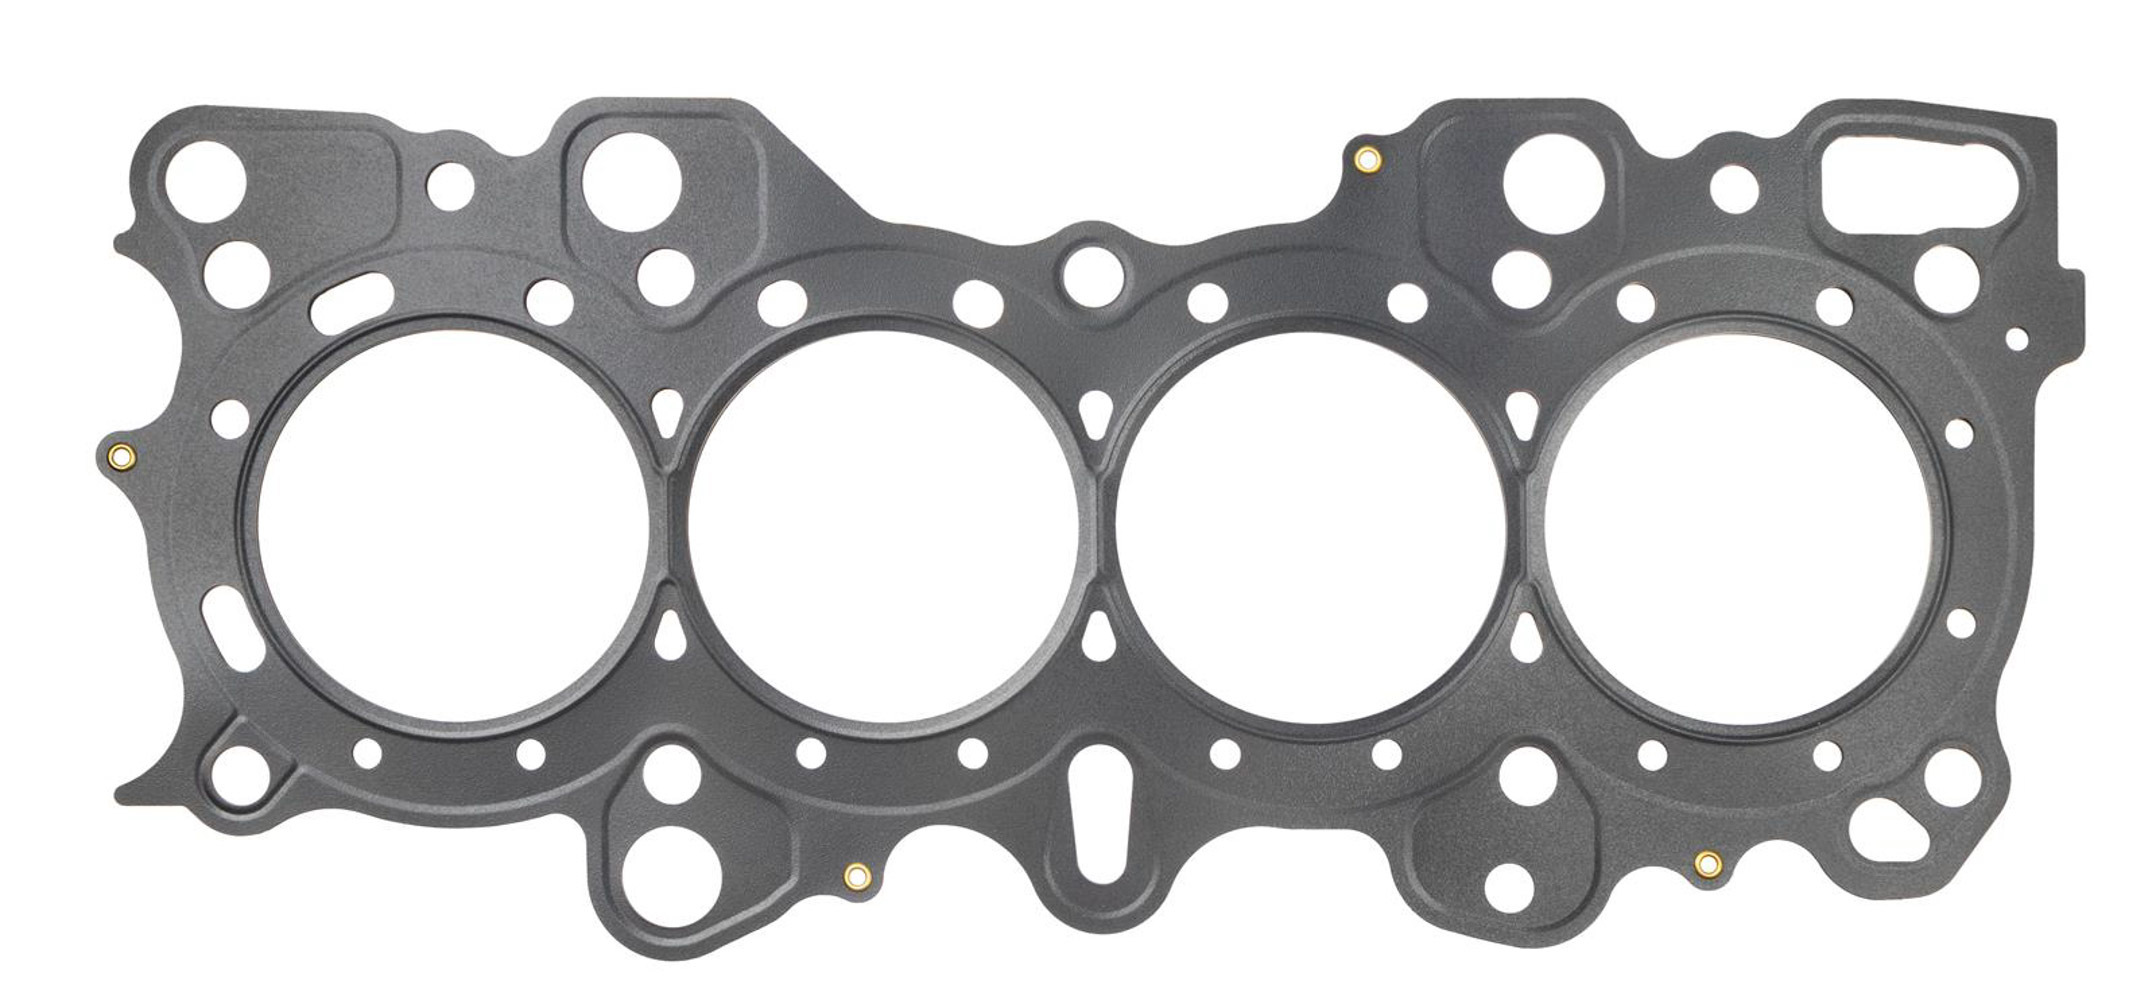 SCE Gaskets M338086GS - Cylinder Head Gasket, MLS Spartan, 82.00 mm Bore, 0.850 mm Compression Thickness, Multi-Layer Steel, Honda 4-Cylinder, Each